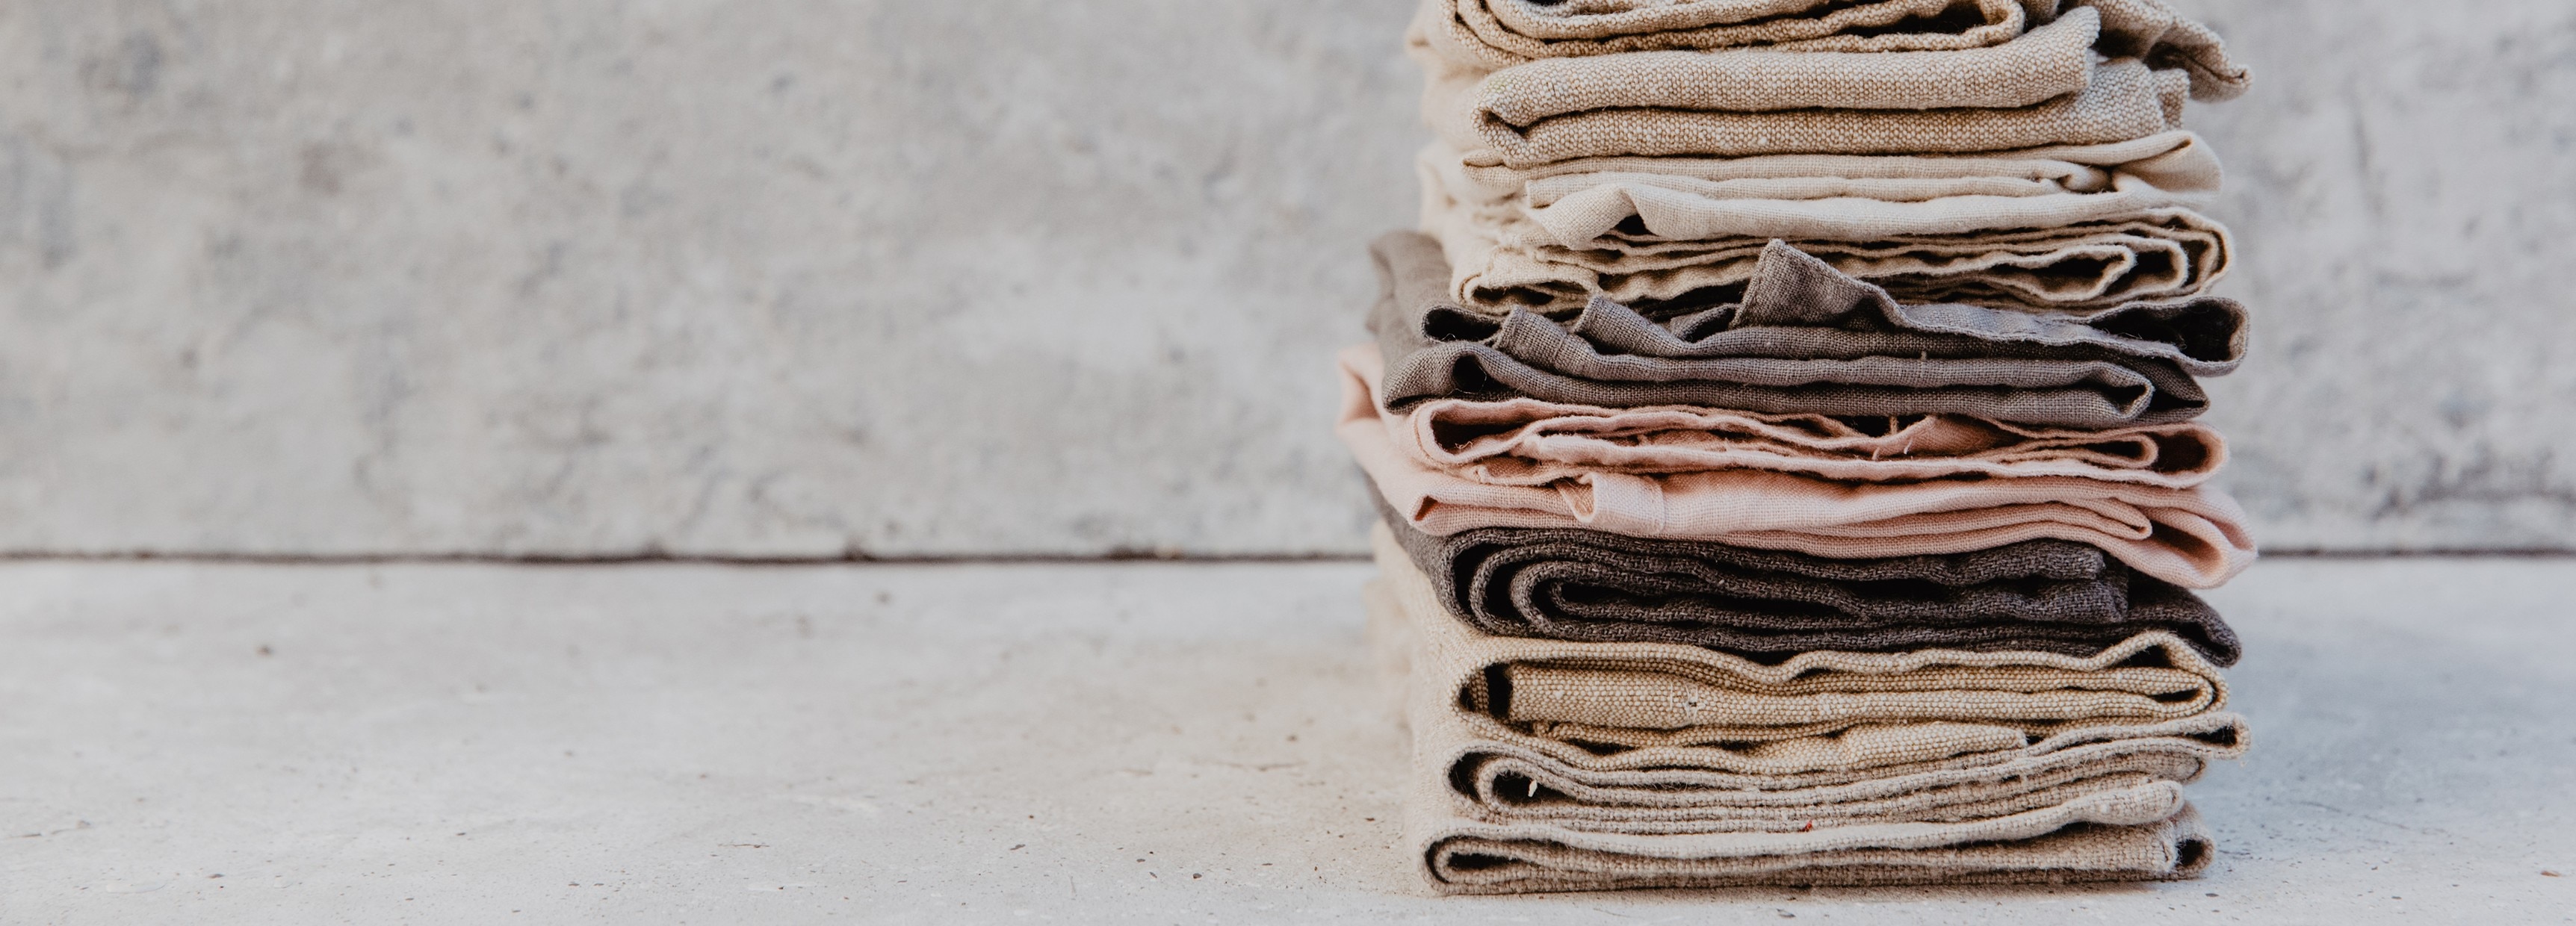 Sustainable Fabrics • Guide on the most ethical materials [2020